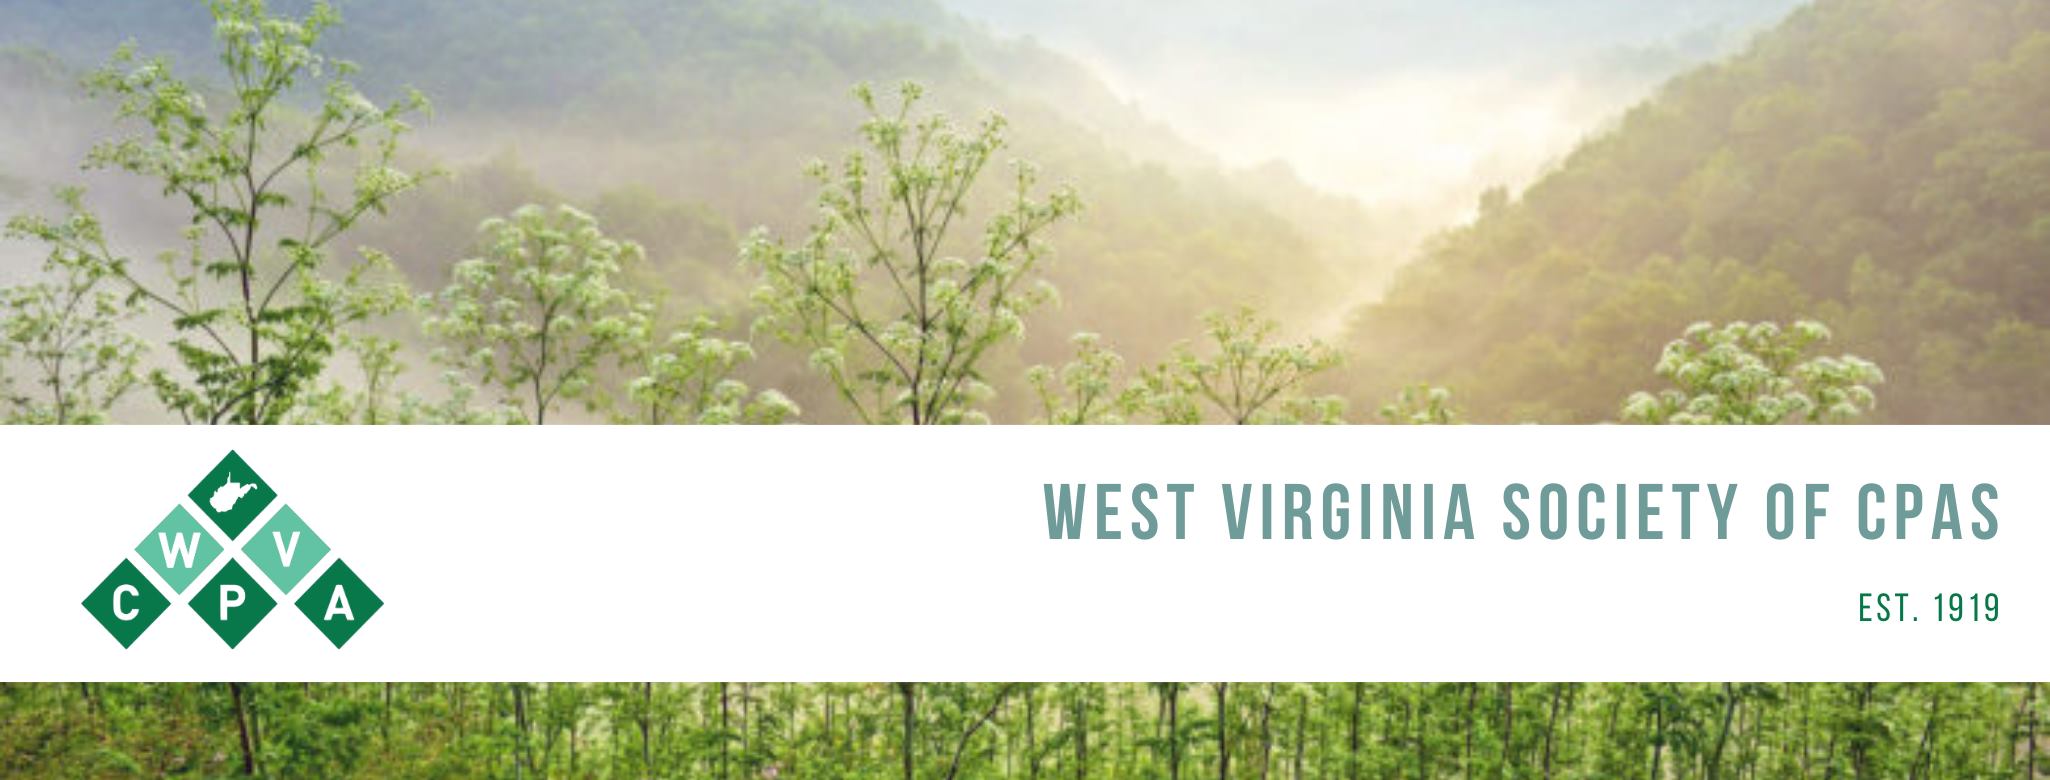 Your source for accounting information in West Virginia